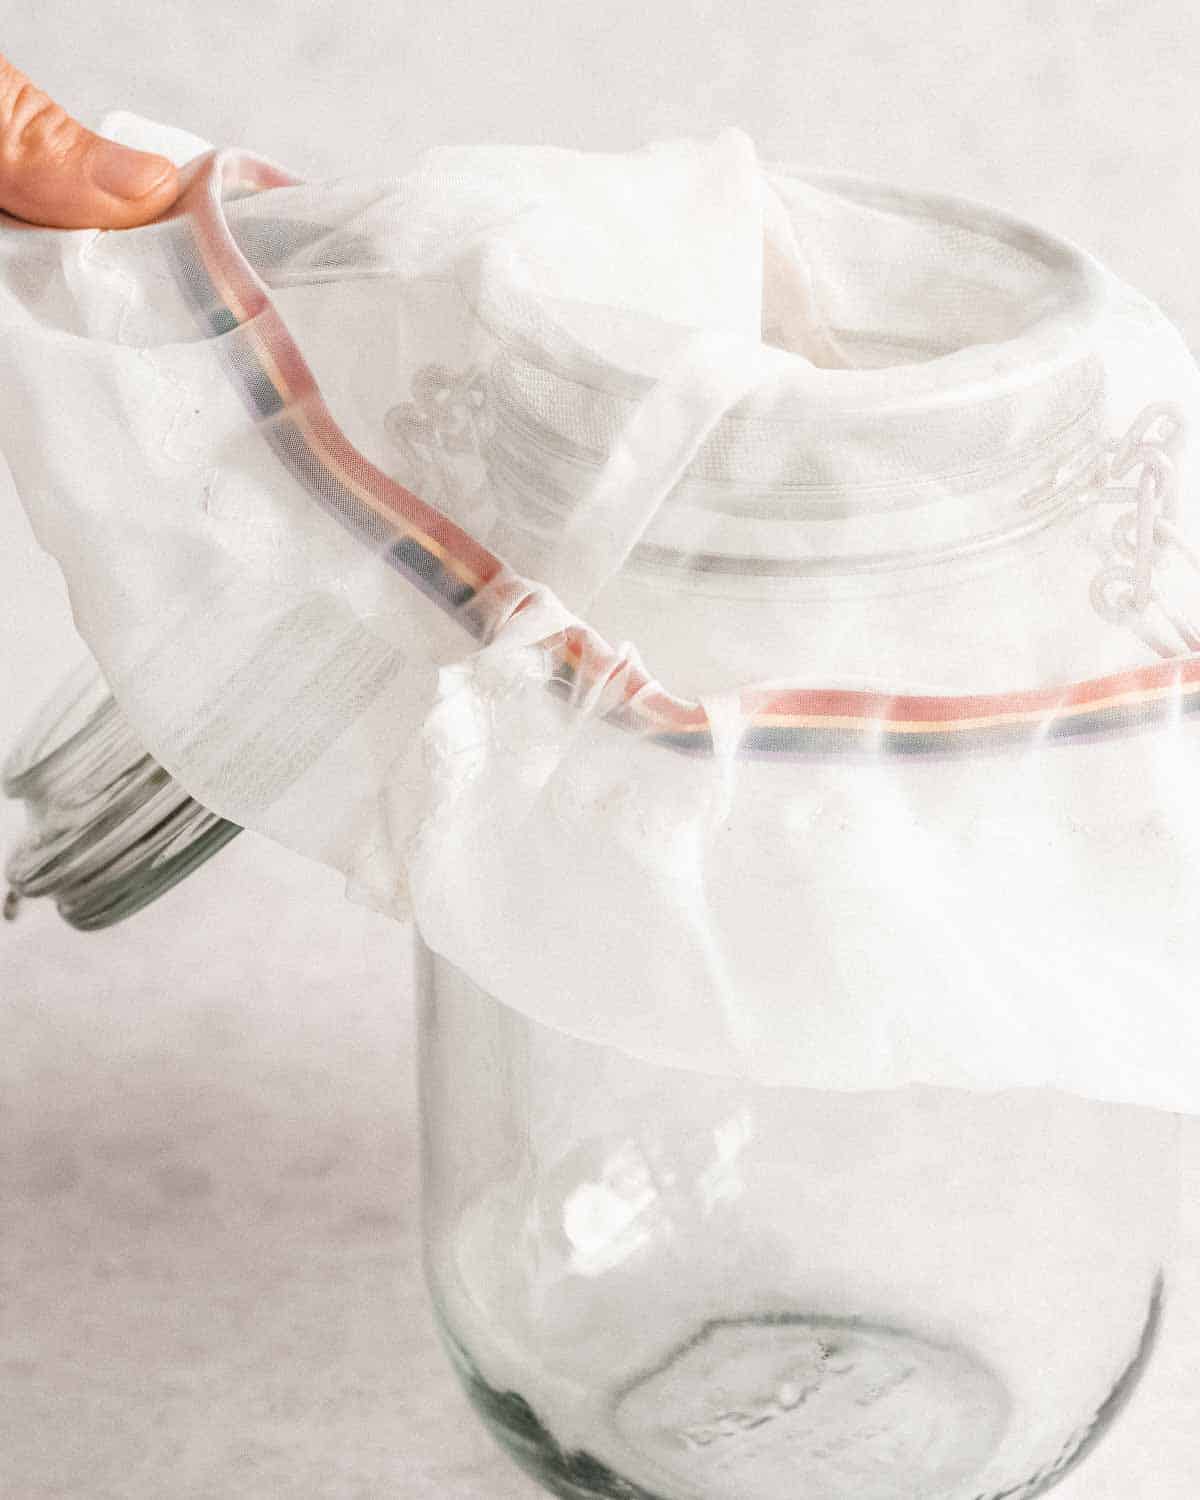 nut milk bag placed on a small fine-mesh sieve thats held above a wide-mouthed empty glass jar.